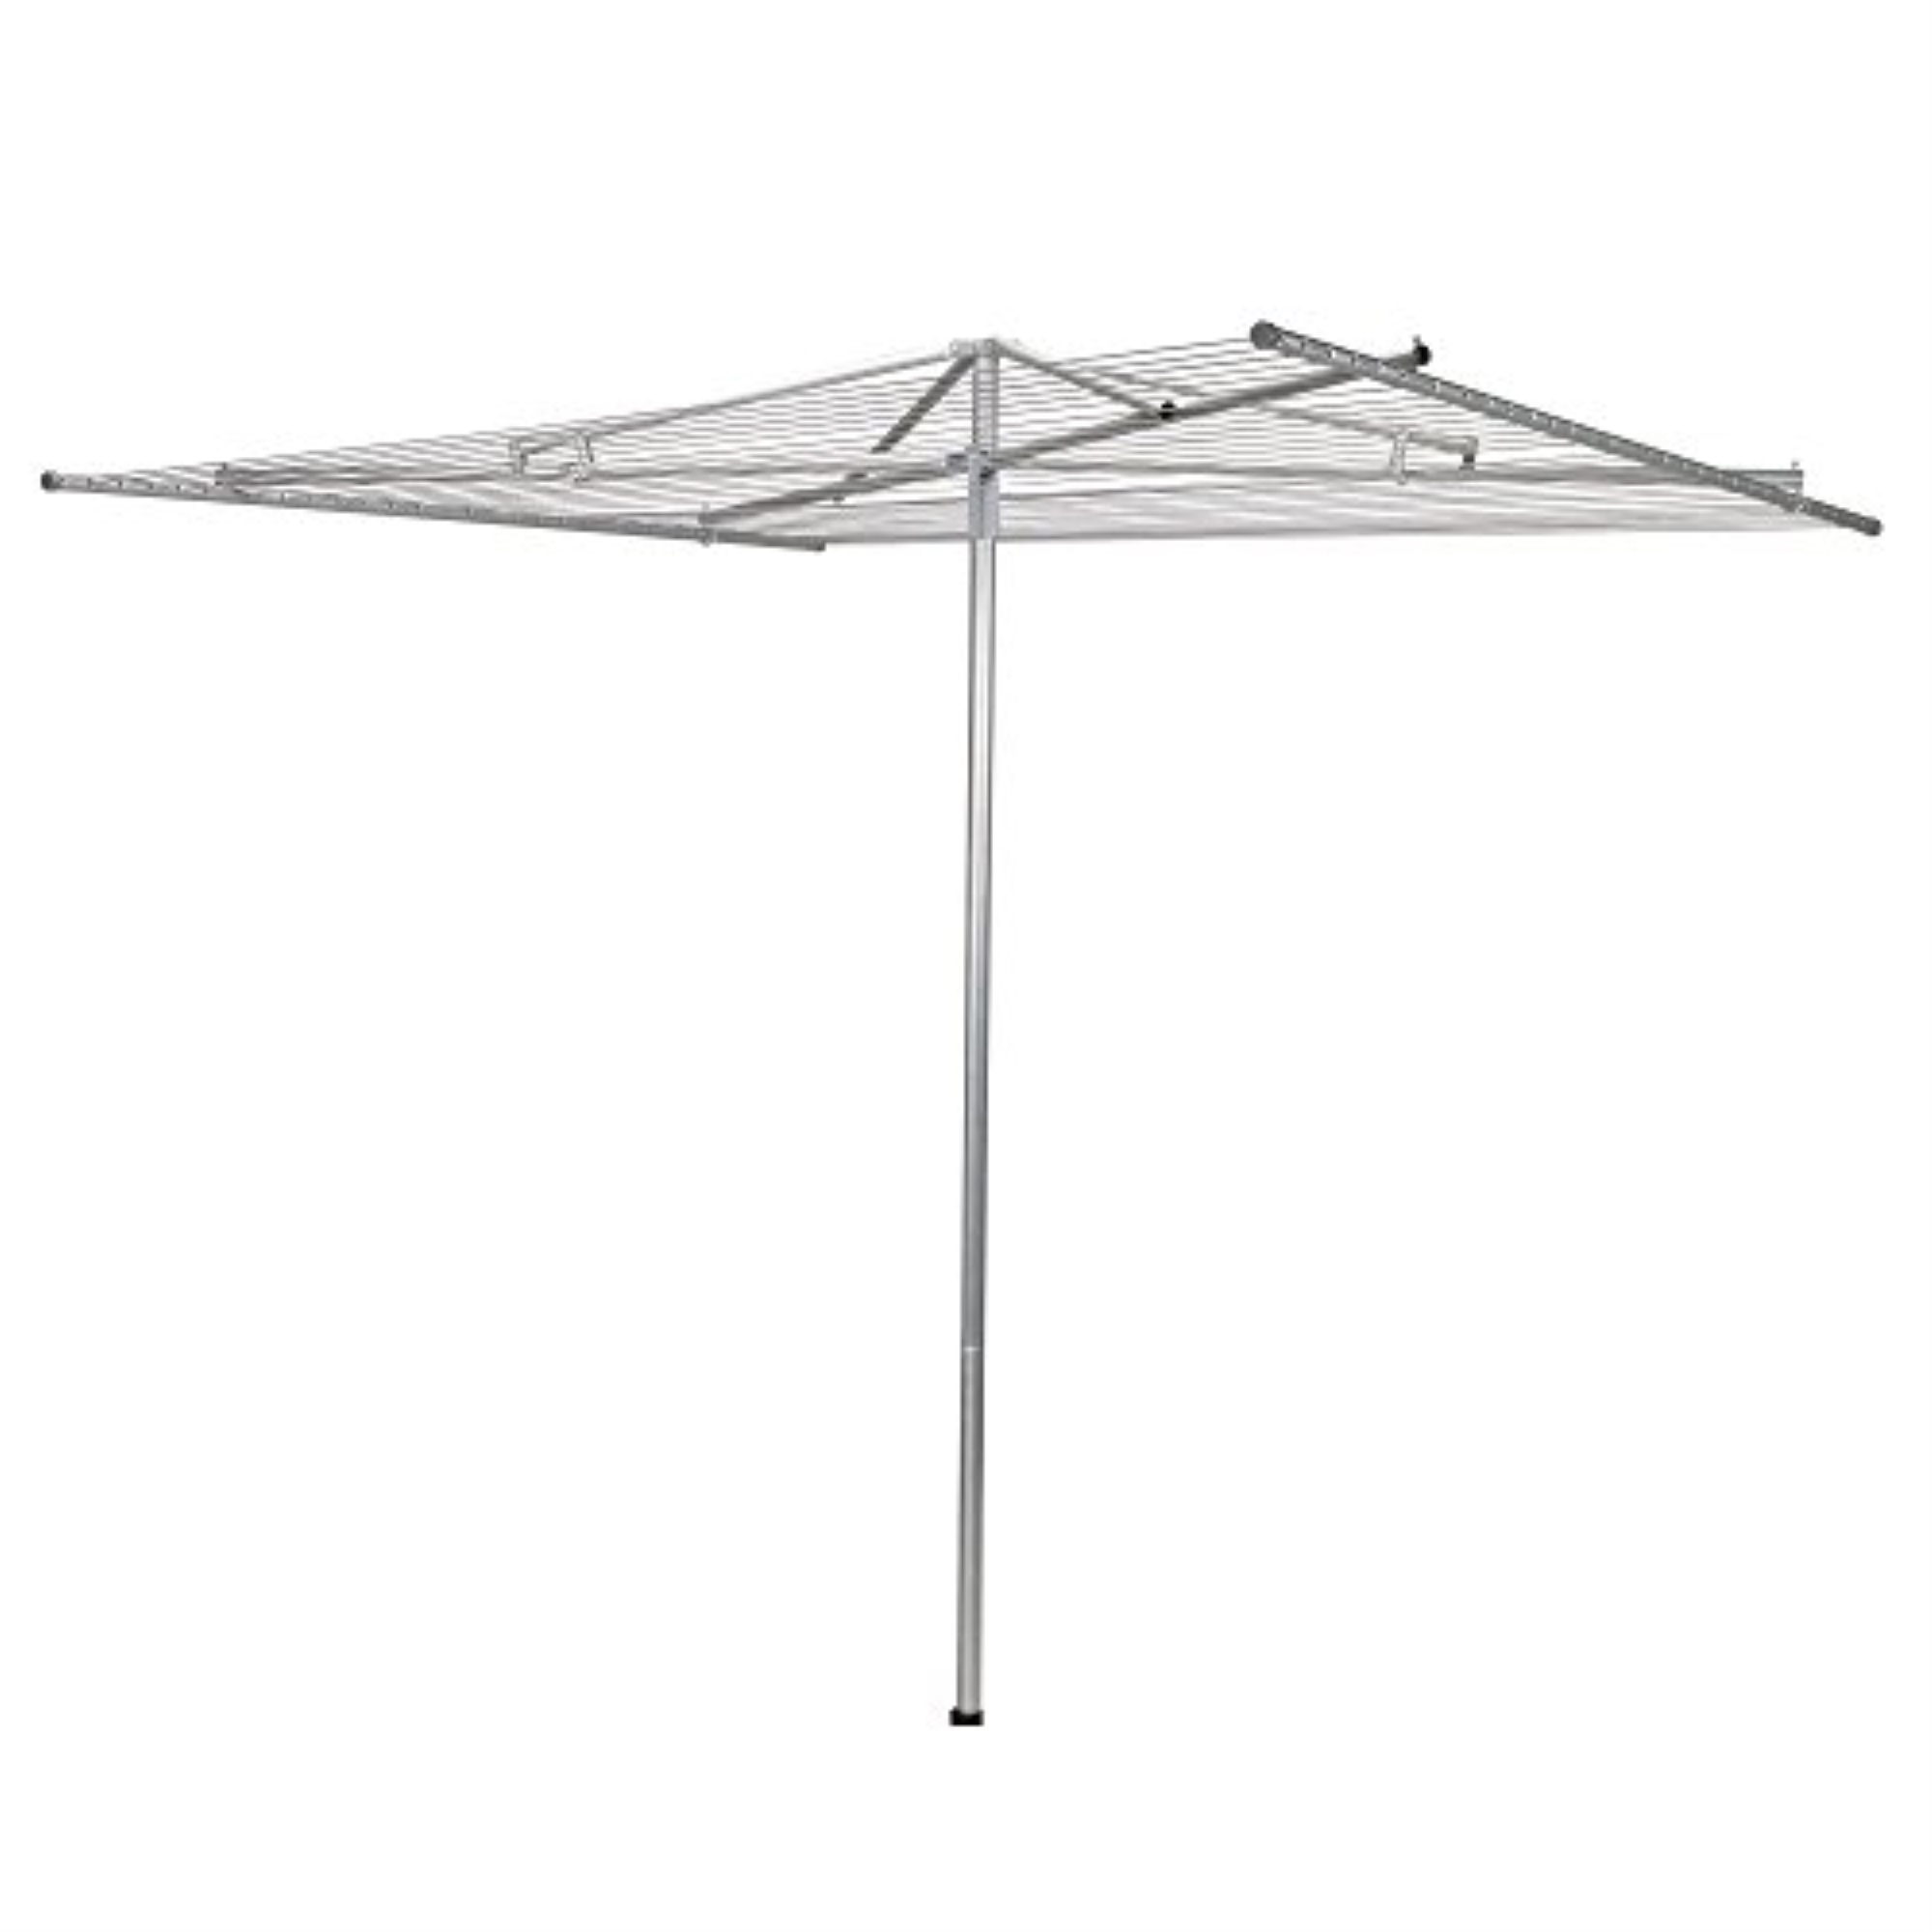 6033409 UMBRELLA CLTHES DRY 72""H Household Essentials 72 in. H X 84 in. W X 72 in. D Aluminum Umbrella Umbrella Clothes Dryer - image 1 of 3